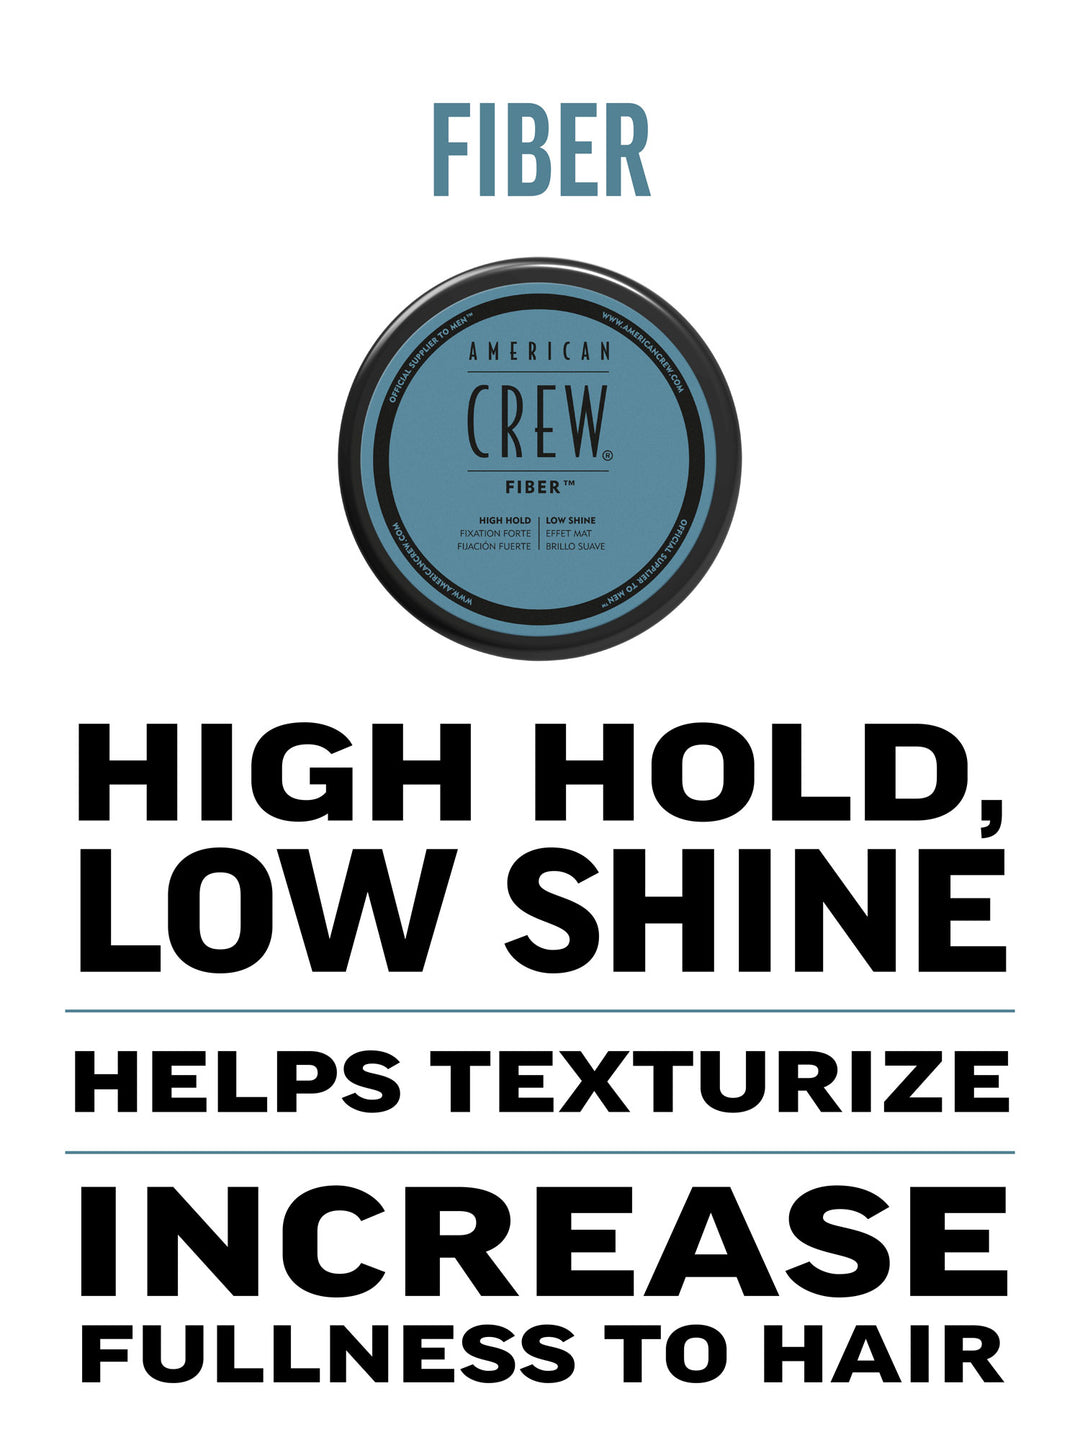 Fiber is high hold, low shine, helps texturizer and increase fullness to hair